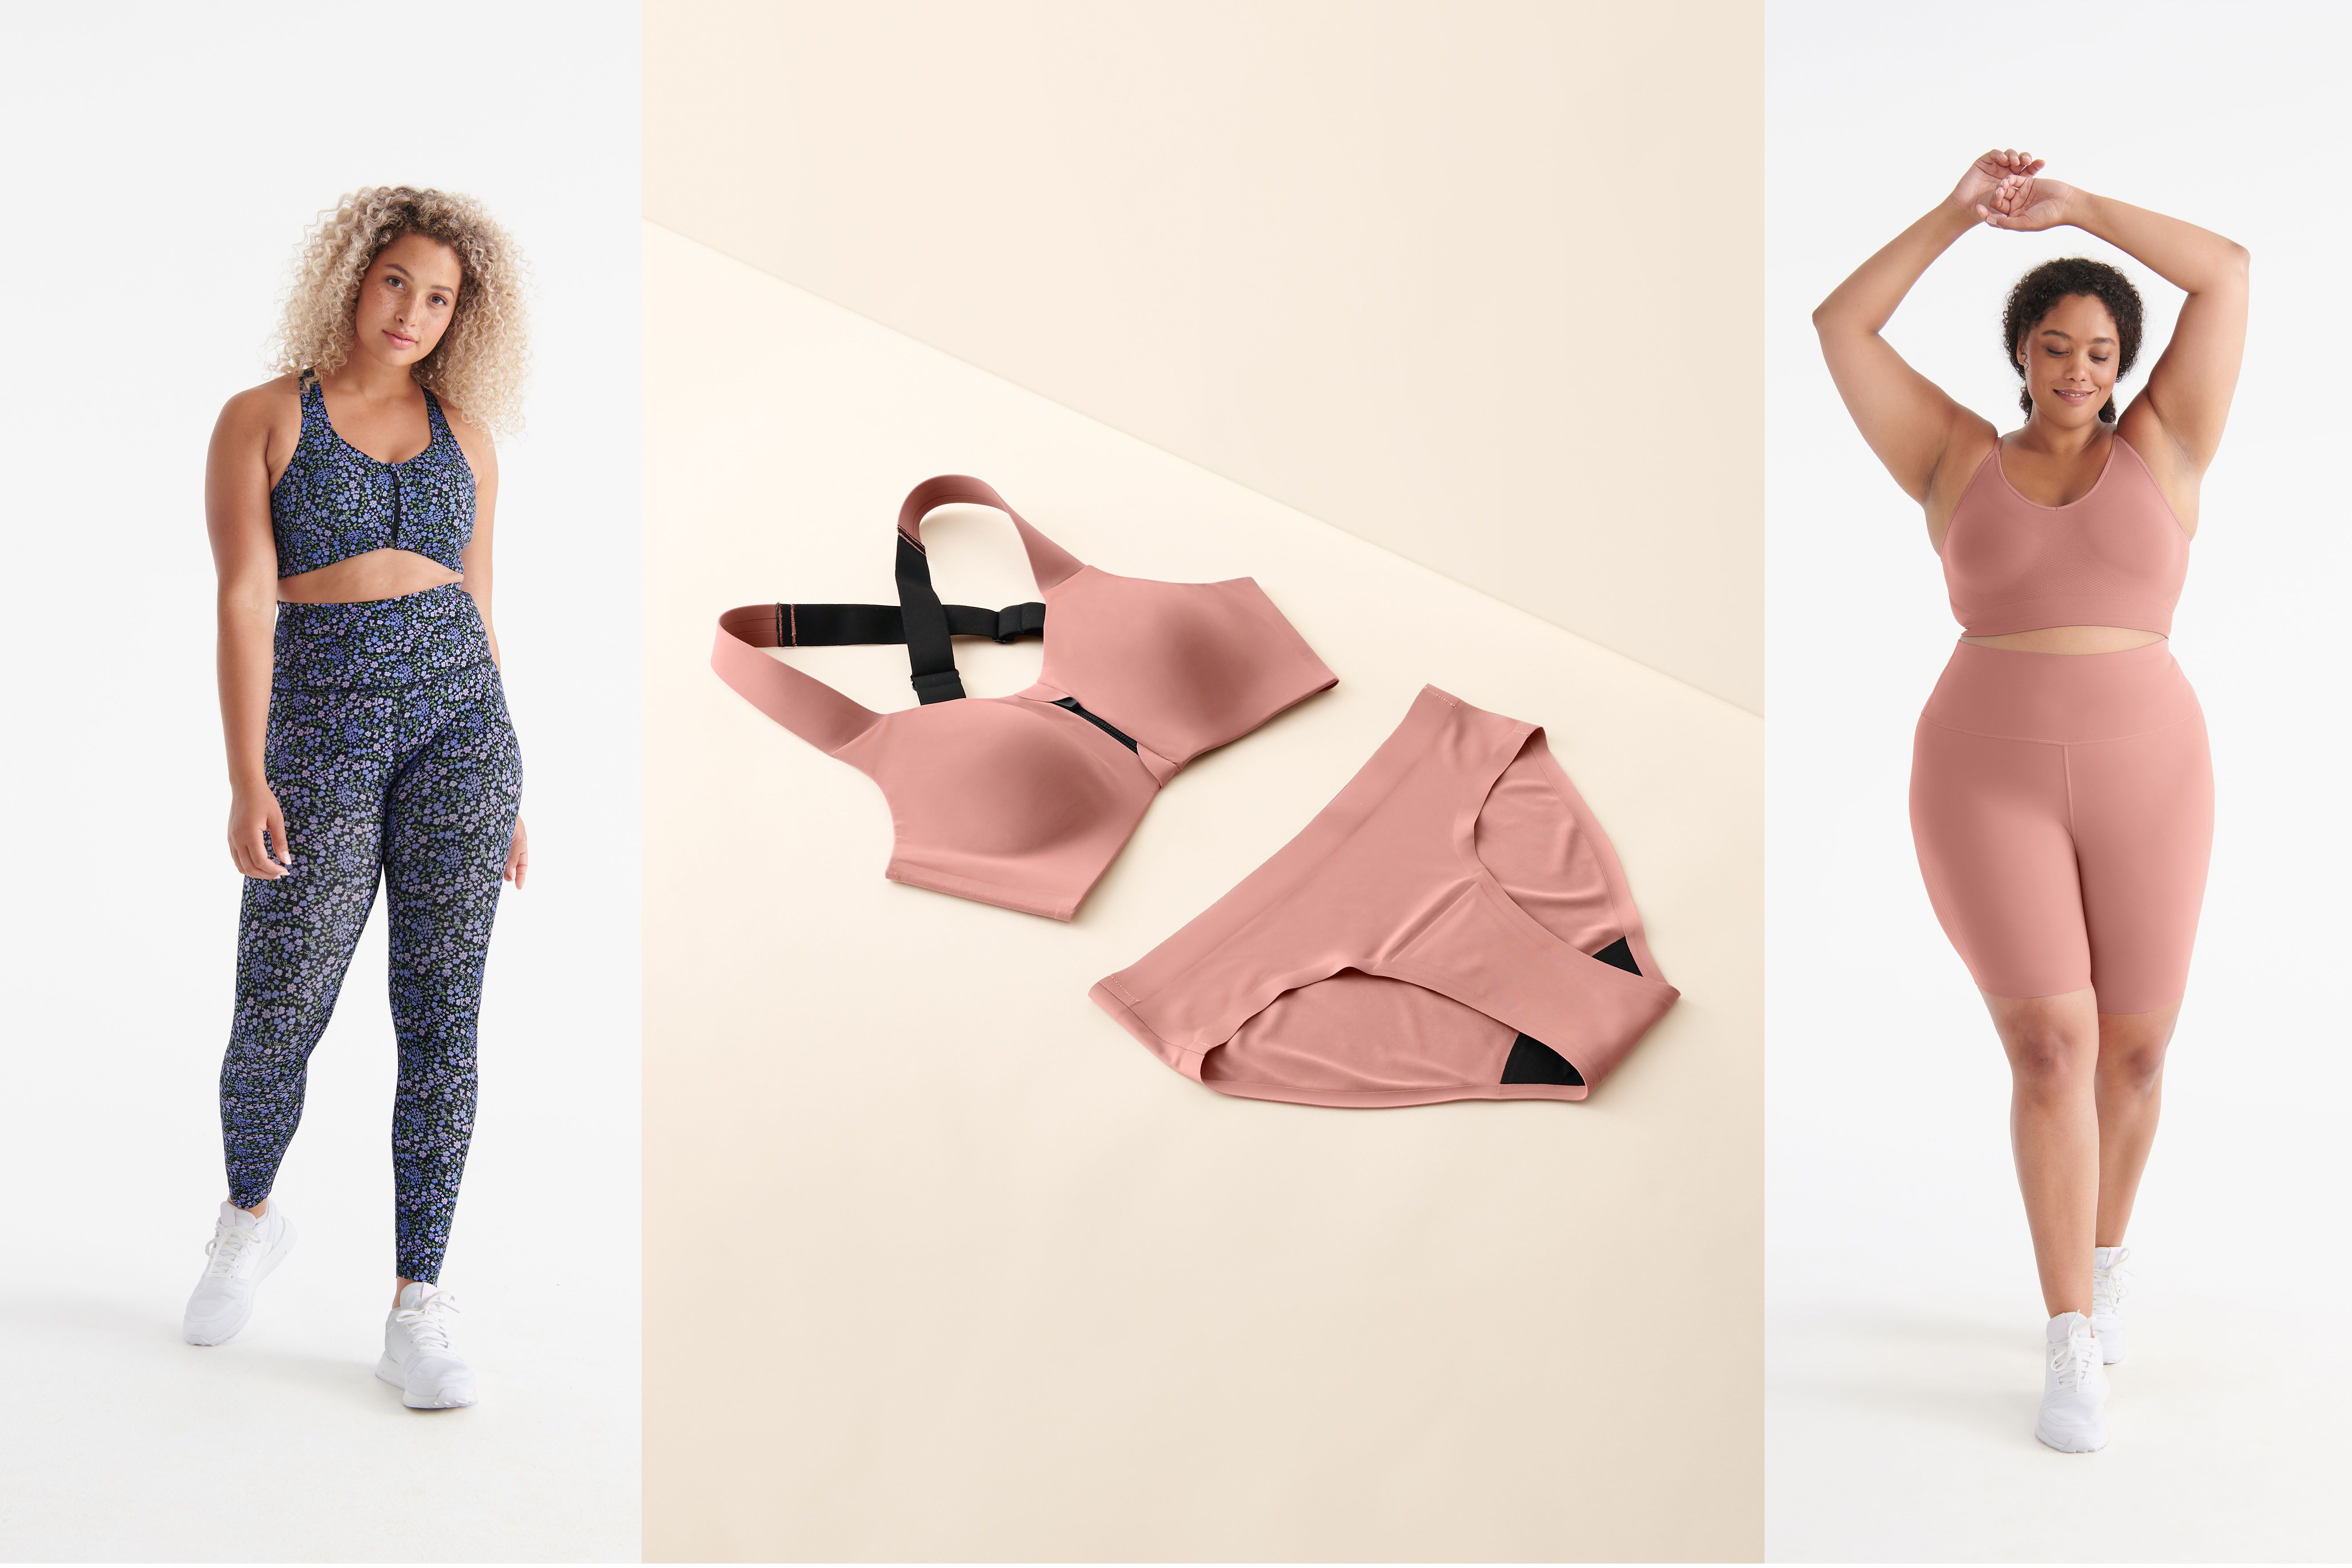 KT by Knix's New Period-Proof Activewear